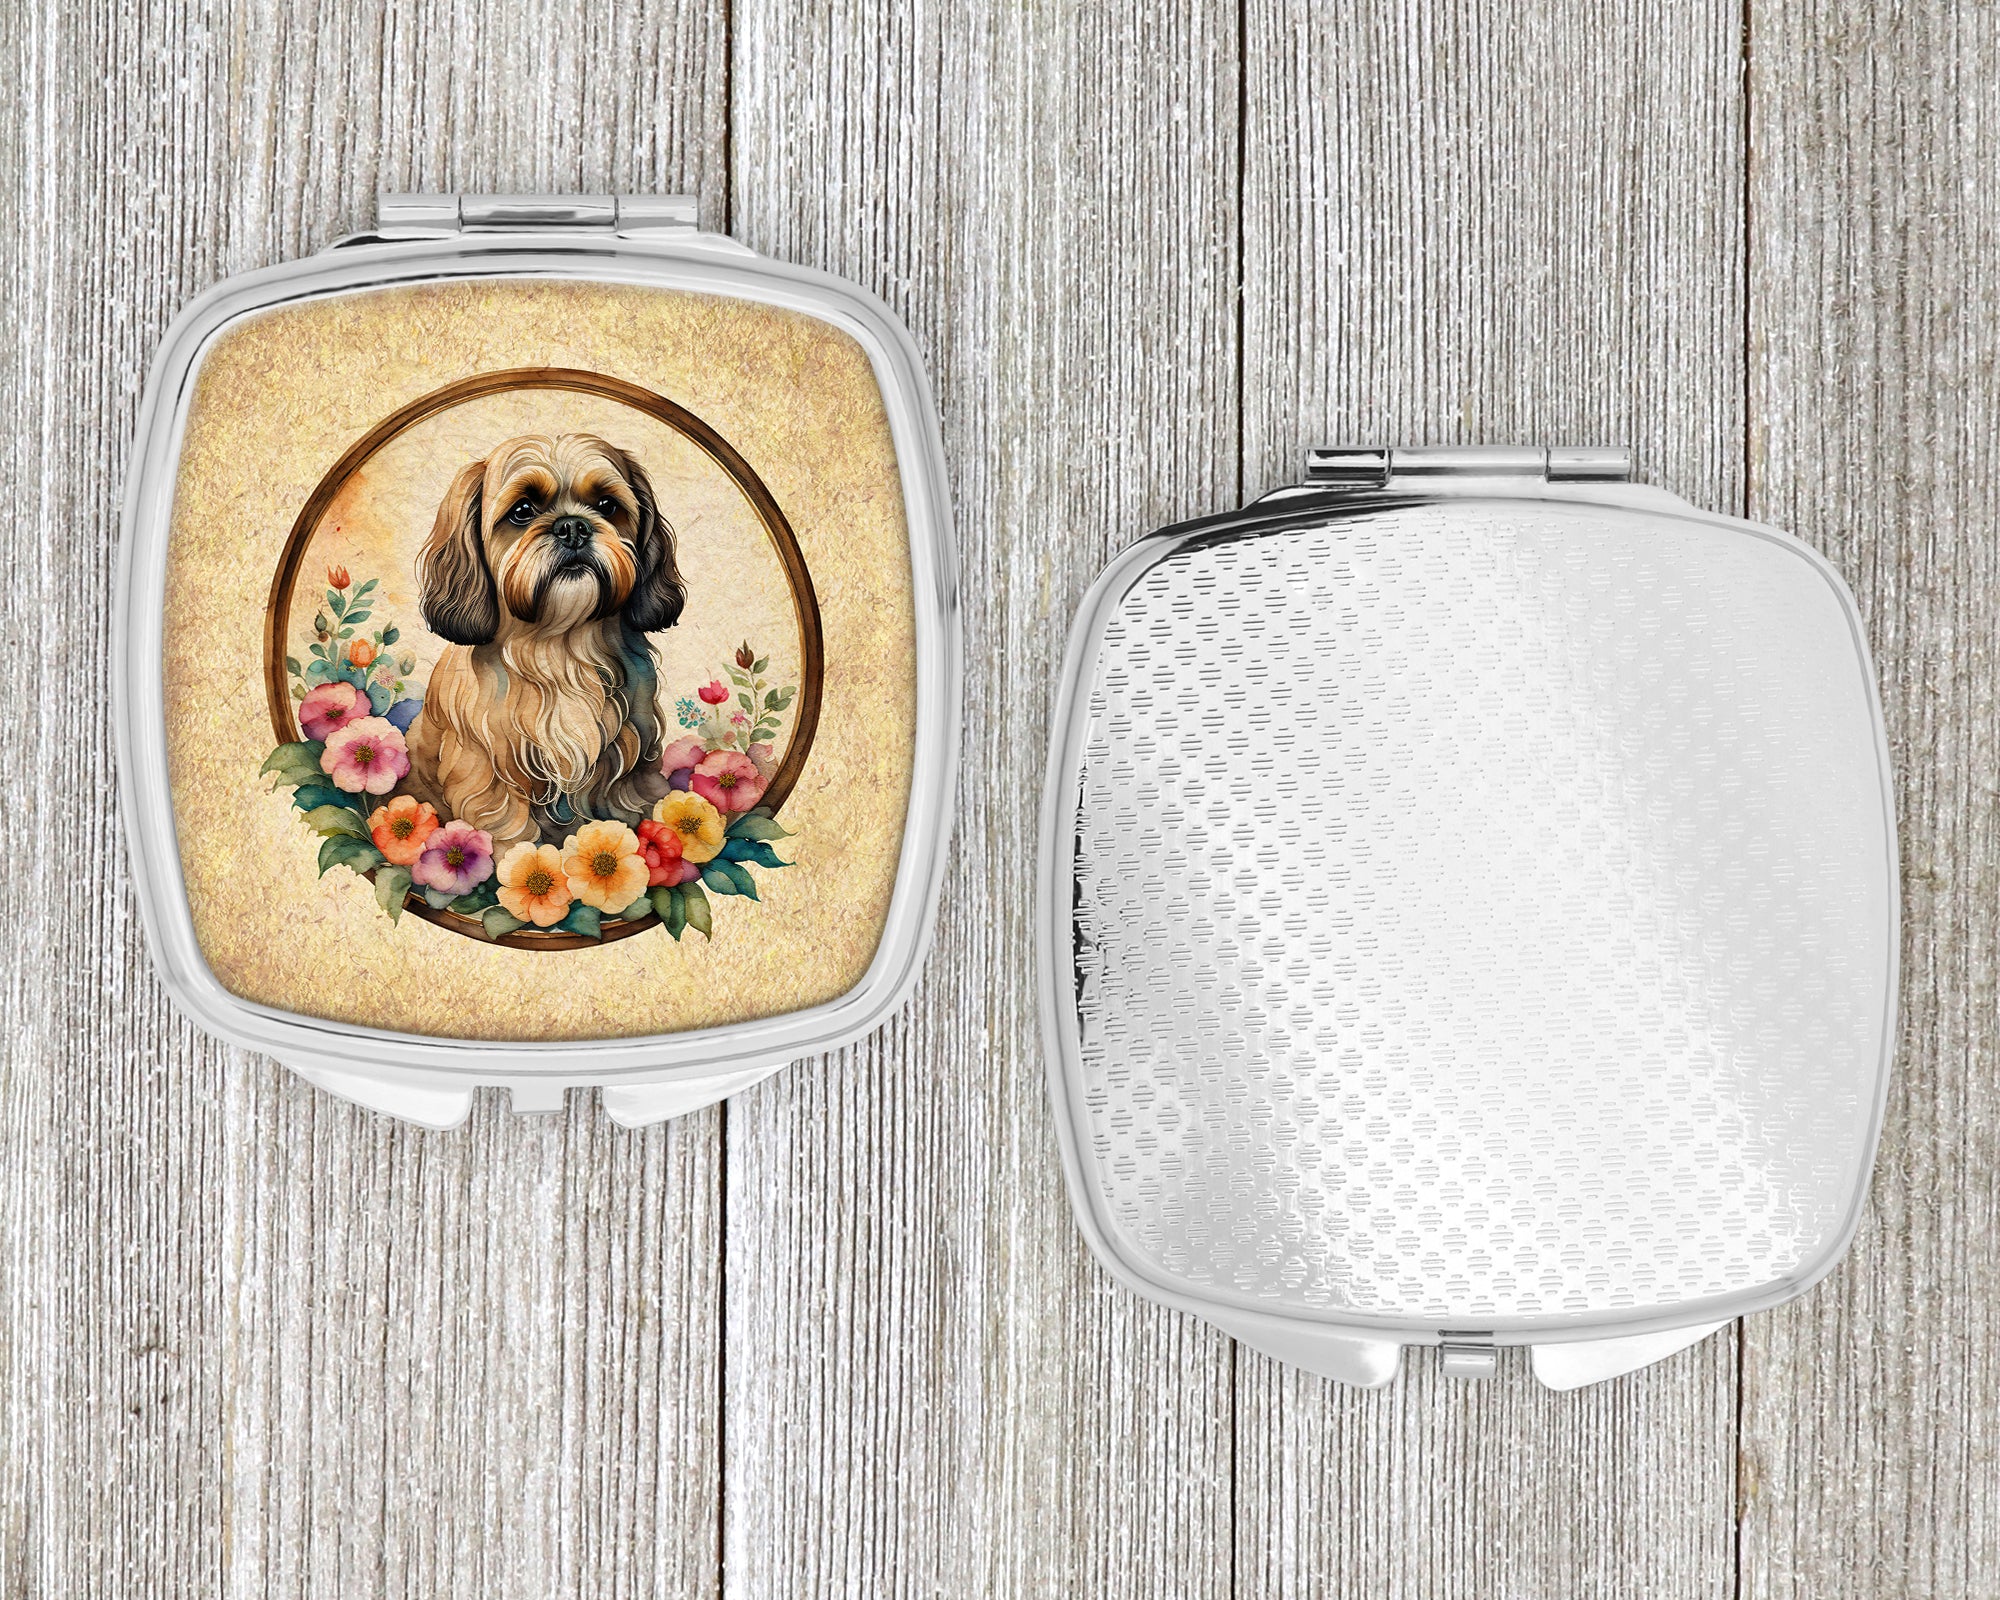 Lhasa Apso and Flowers Compact Mirror